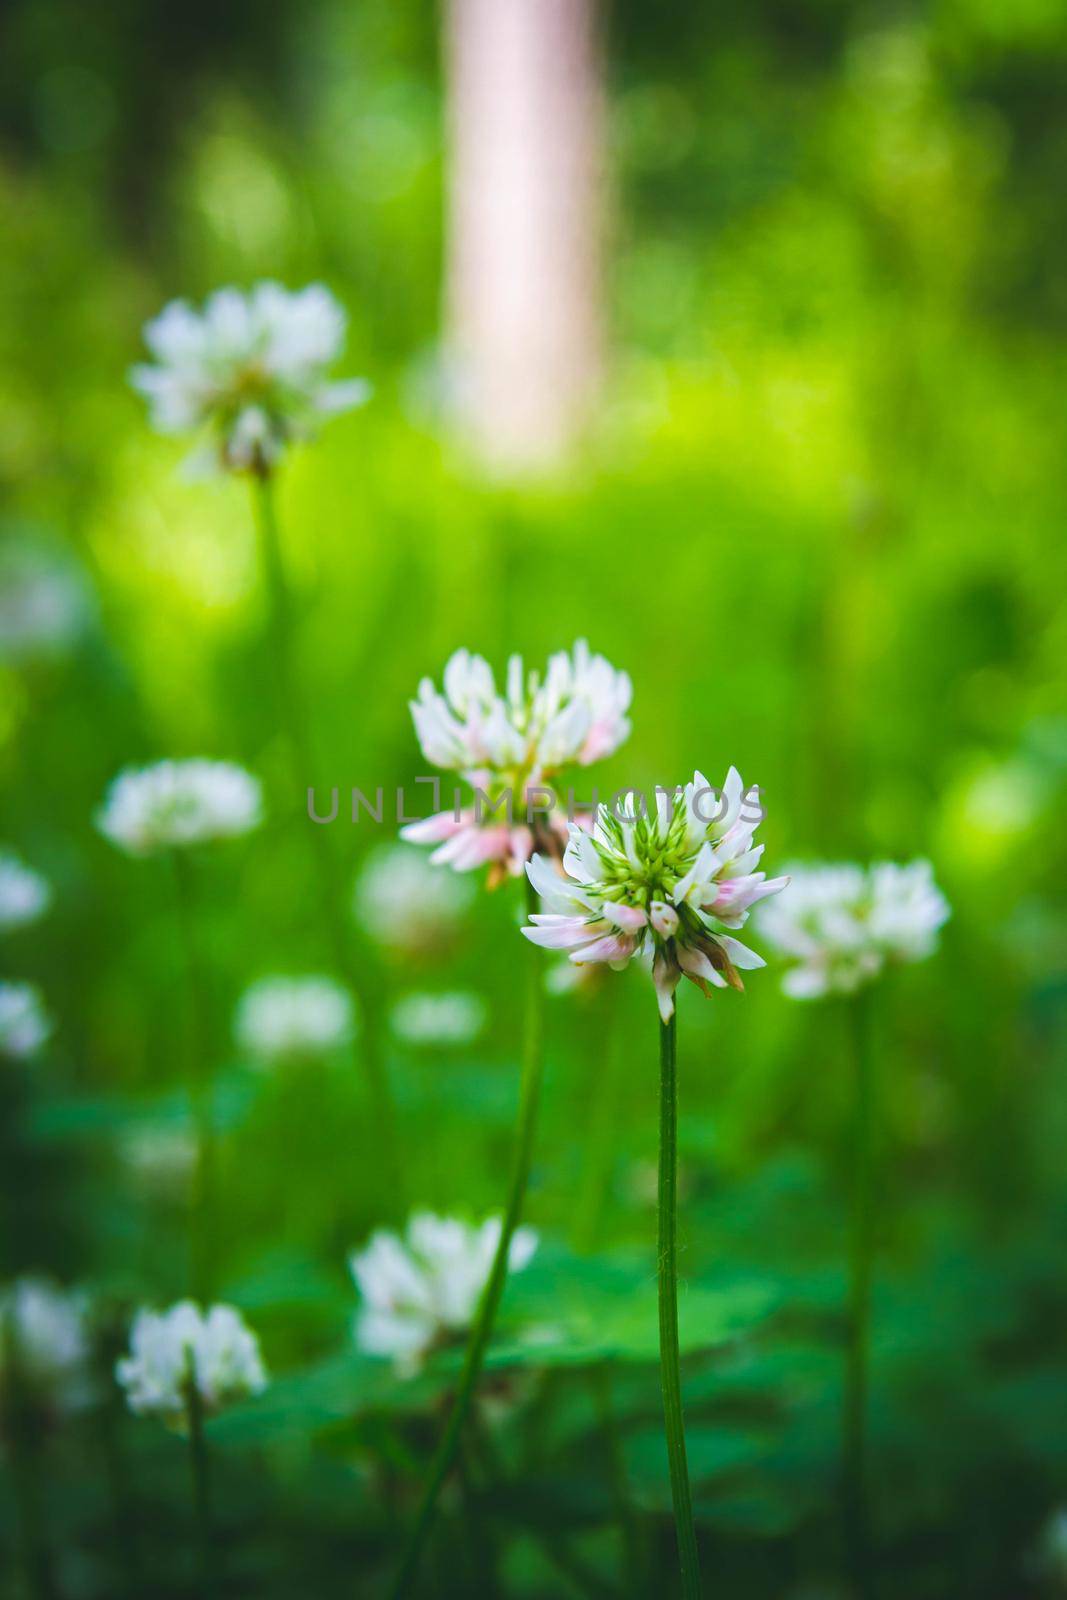 Beautiful flowers in the green grass. Flower close-up in the thicket. by Verrone